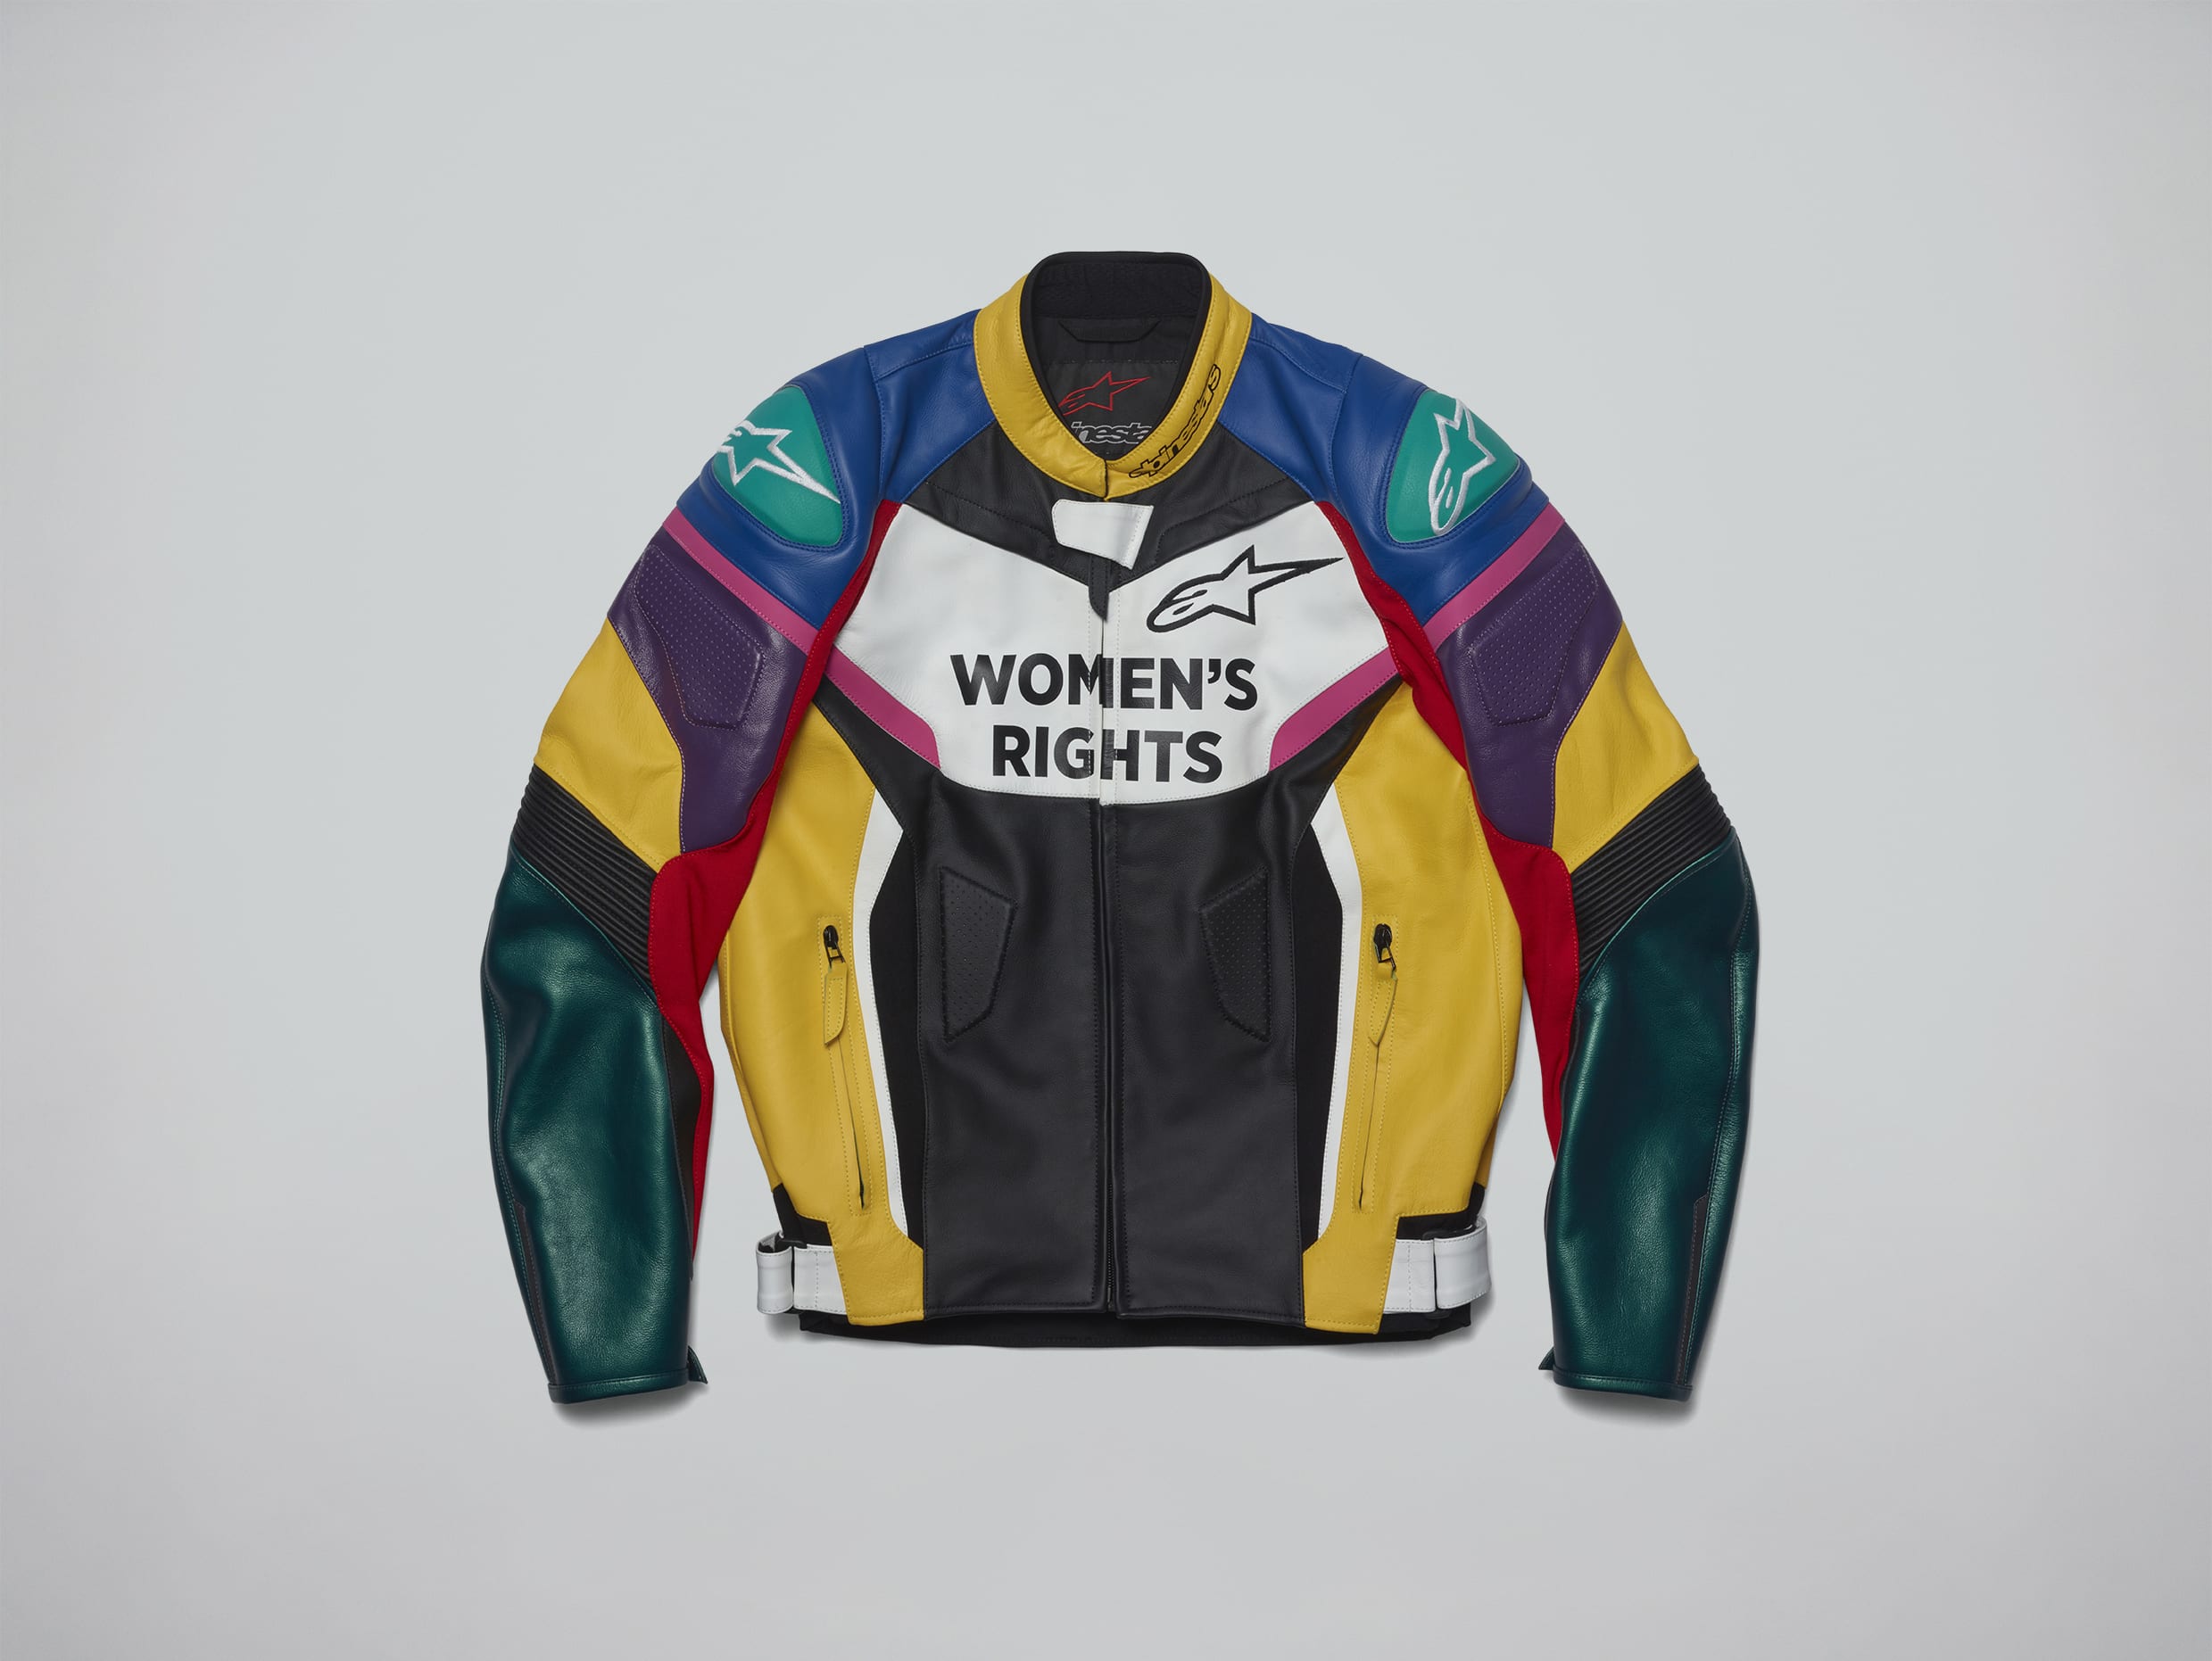 A moto jacket is pictured